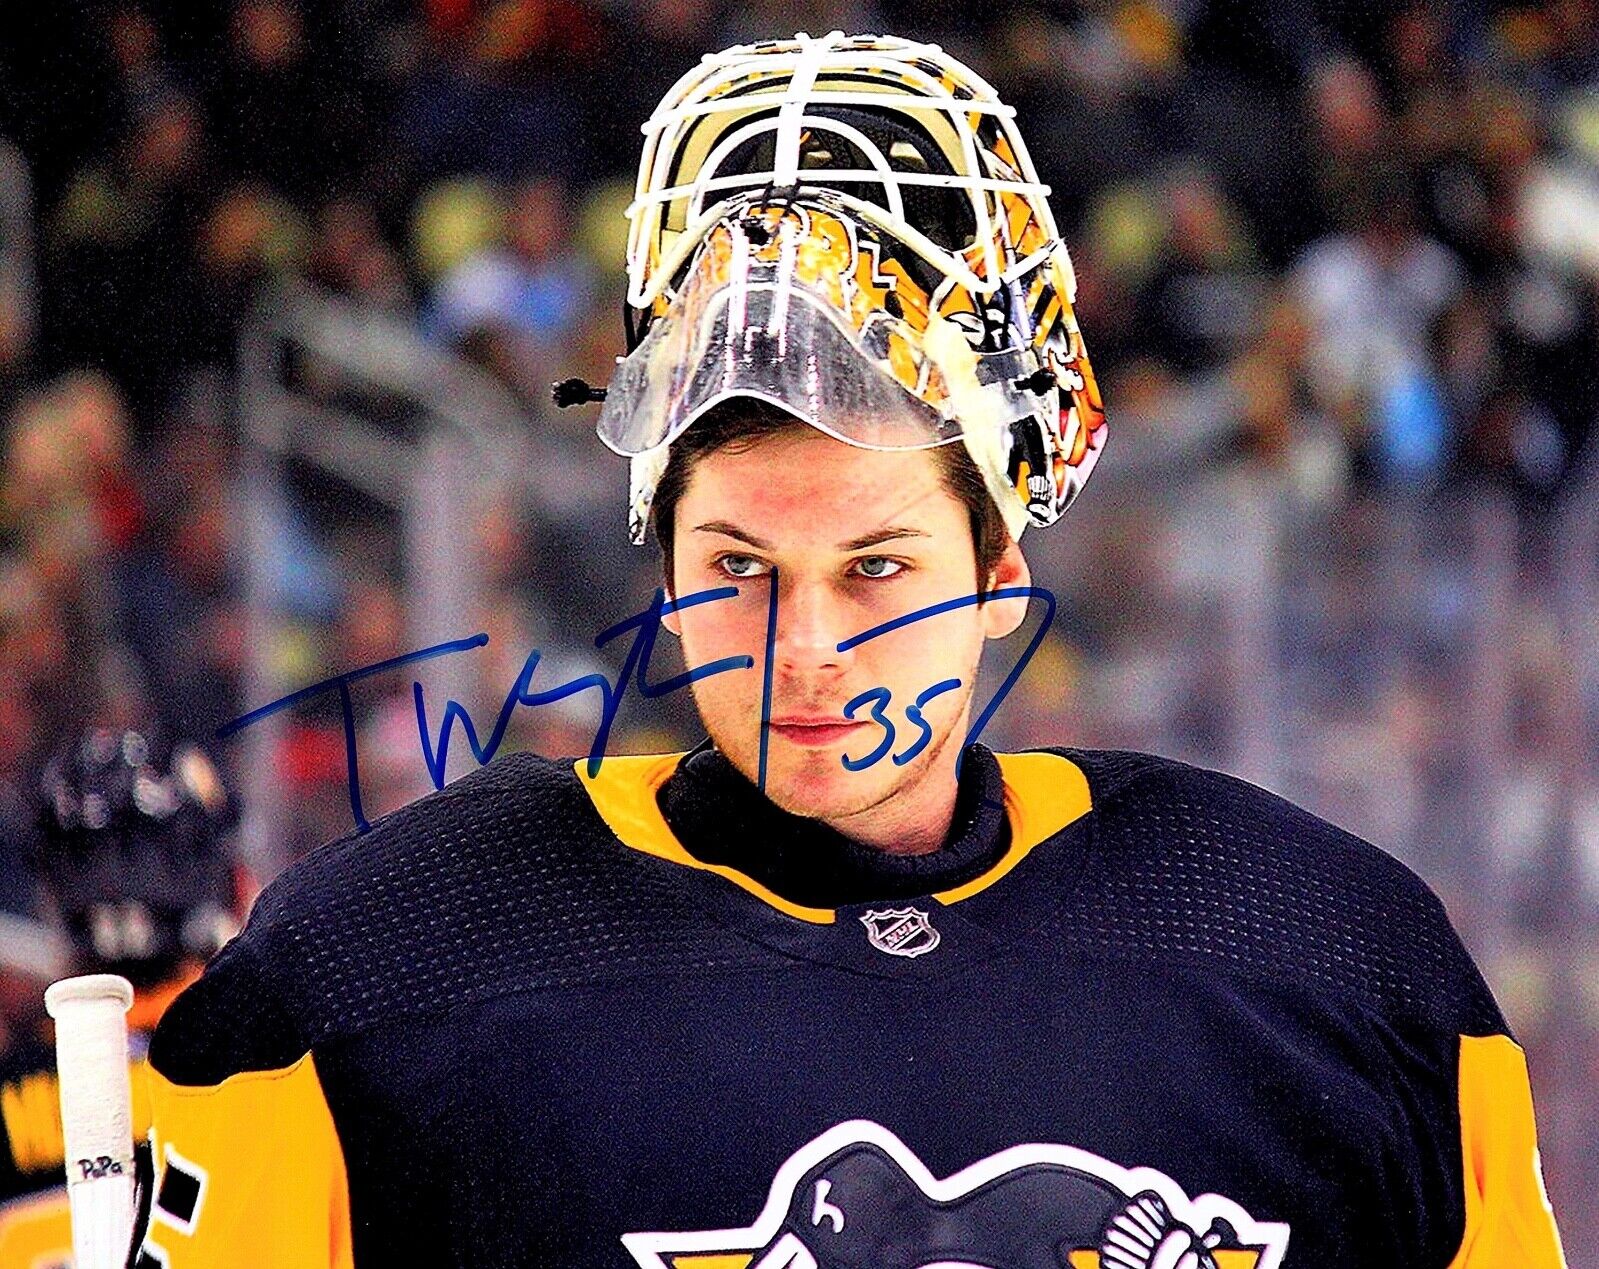 TRISTAN JARRY AUTOGRAPHED Hand SIGNED 8x10 Pittsburgh PENGUINS Photo Poster painting w/COA